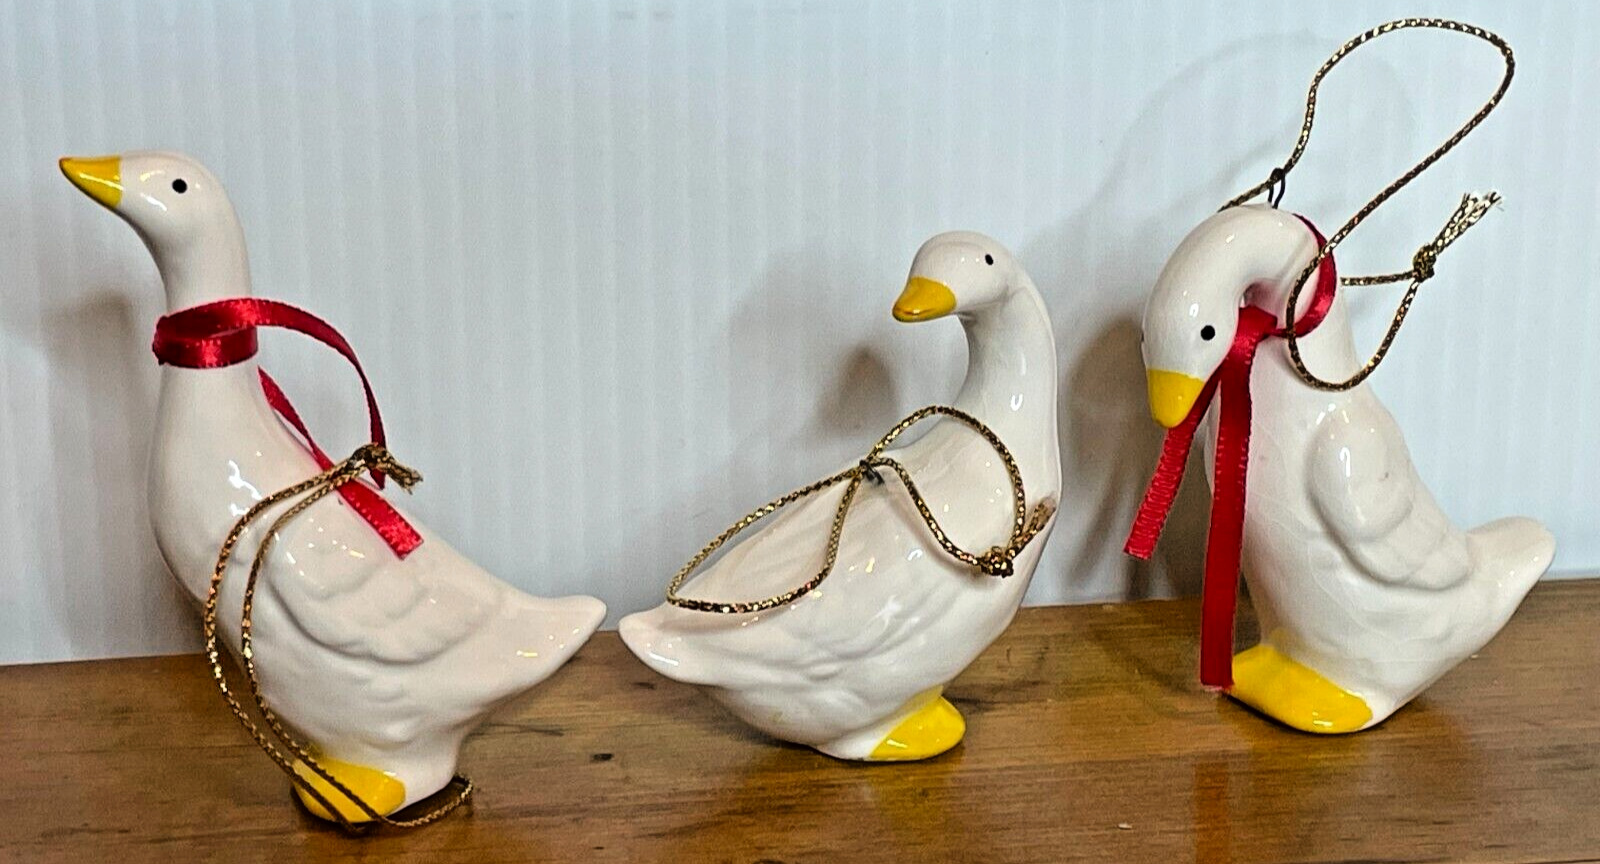 Lot 3 Vintage Geese Ceramic Goose Porcelain White Duck Christmas Tree Ornaments